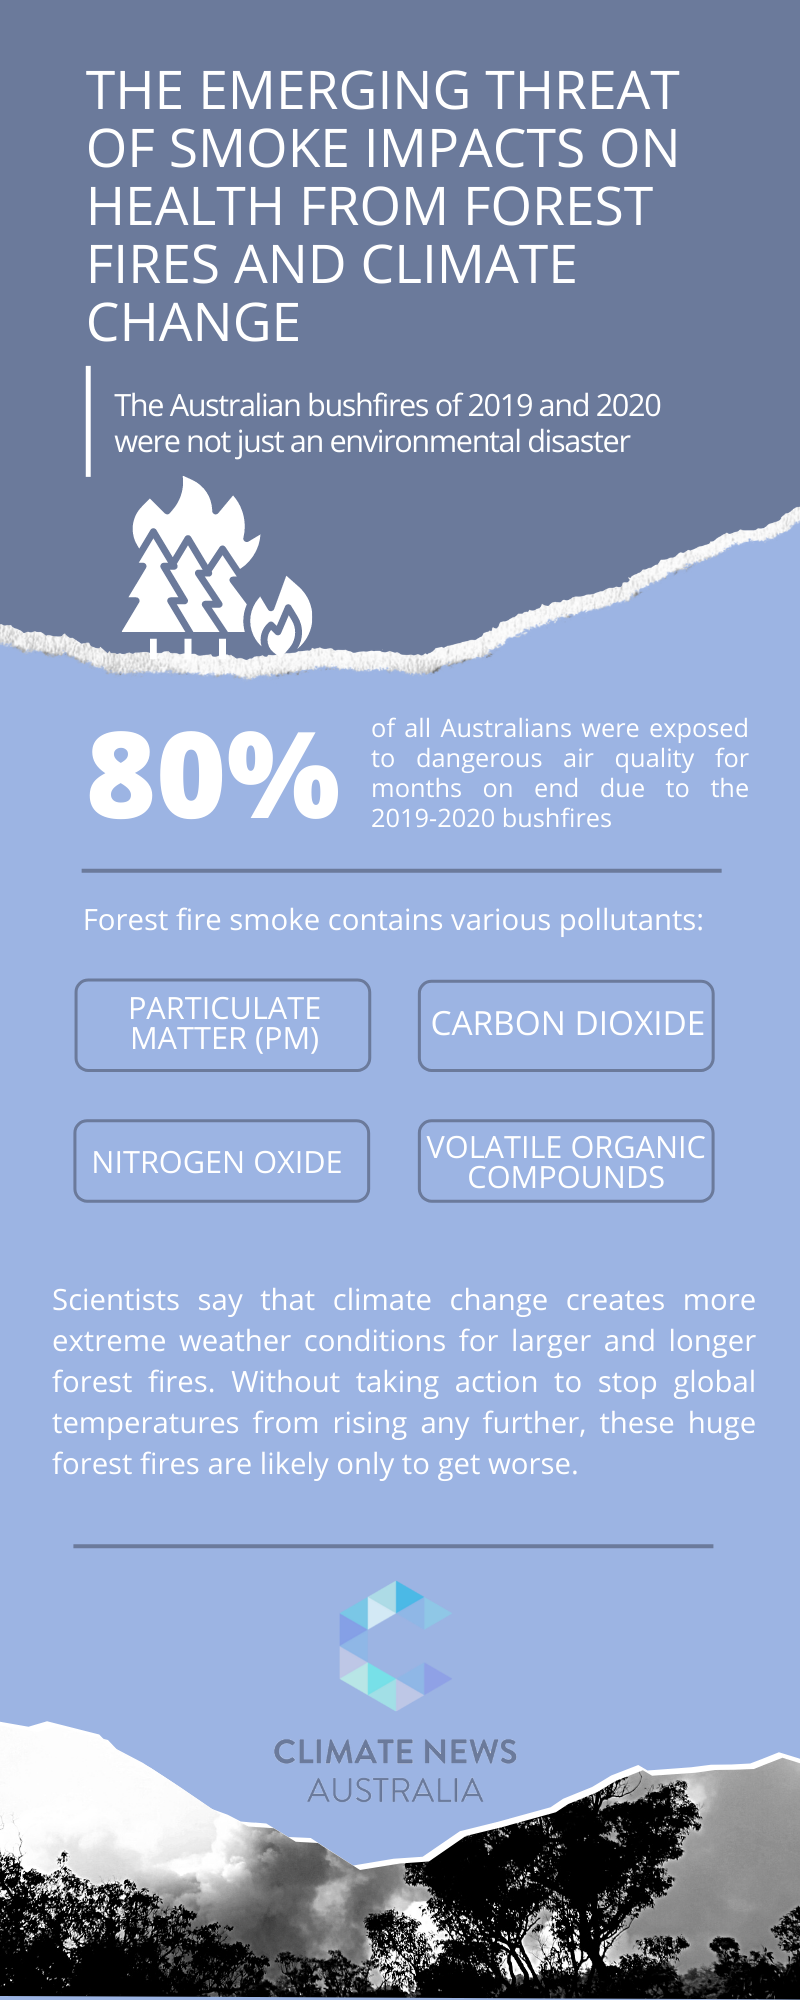 The Emerging Threat of Smoke Impacts on Health From Forest Fires and Climate Change